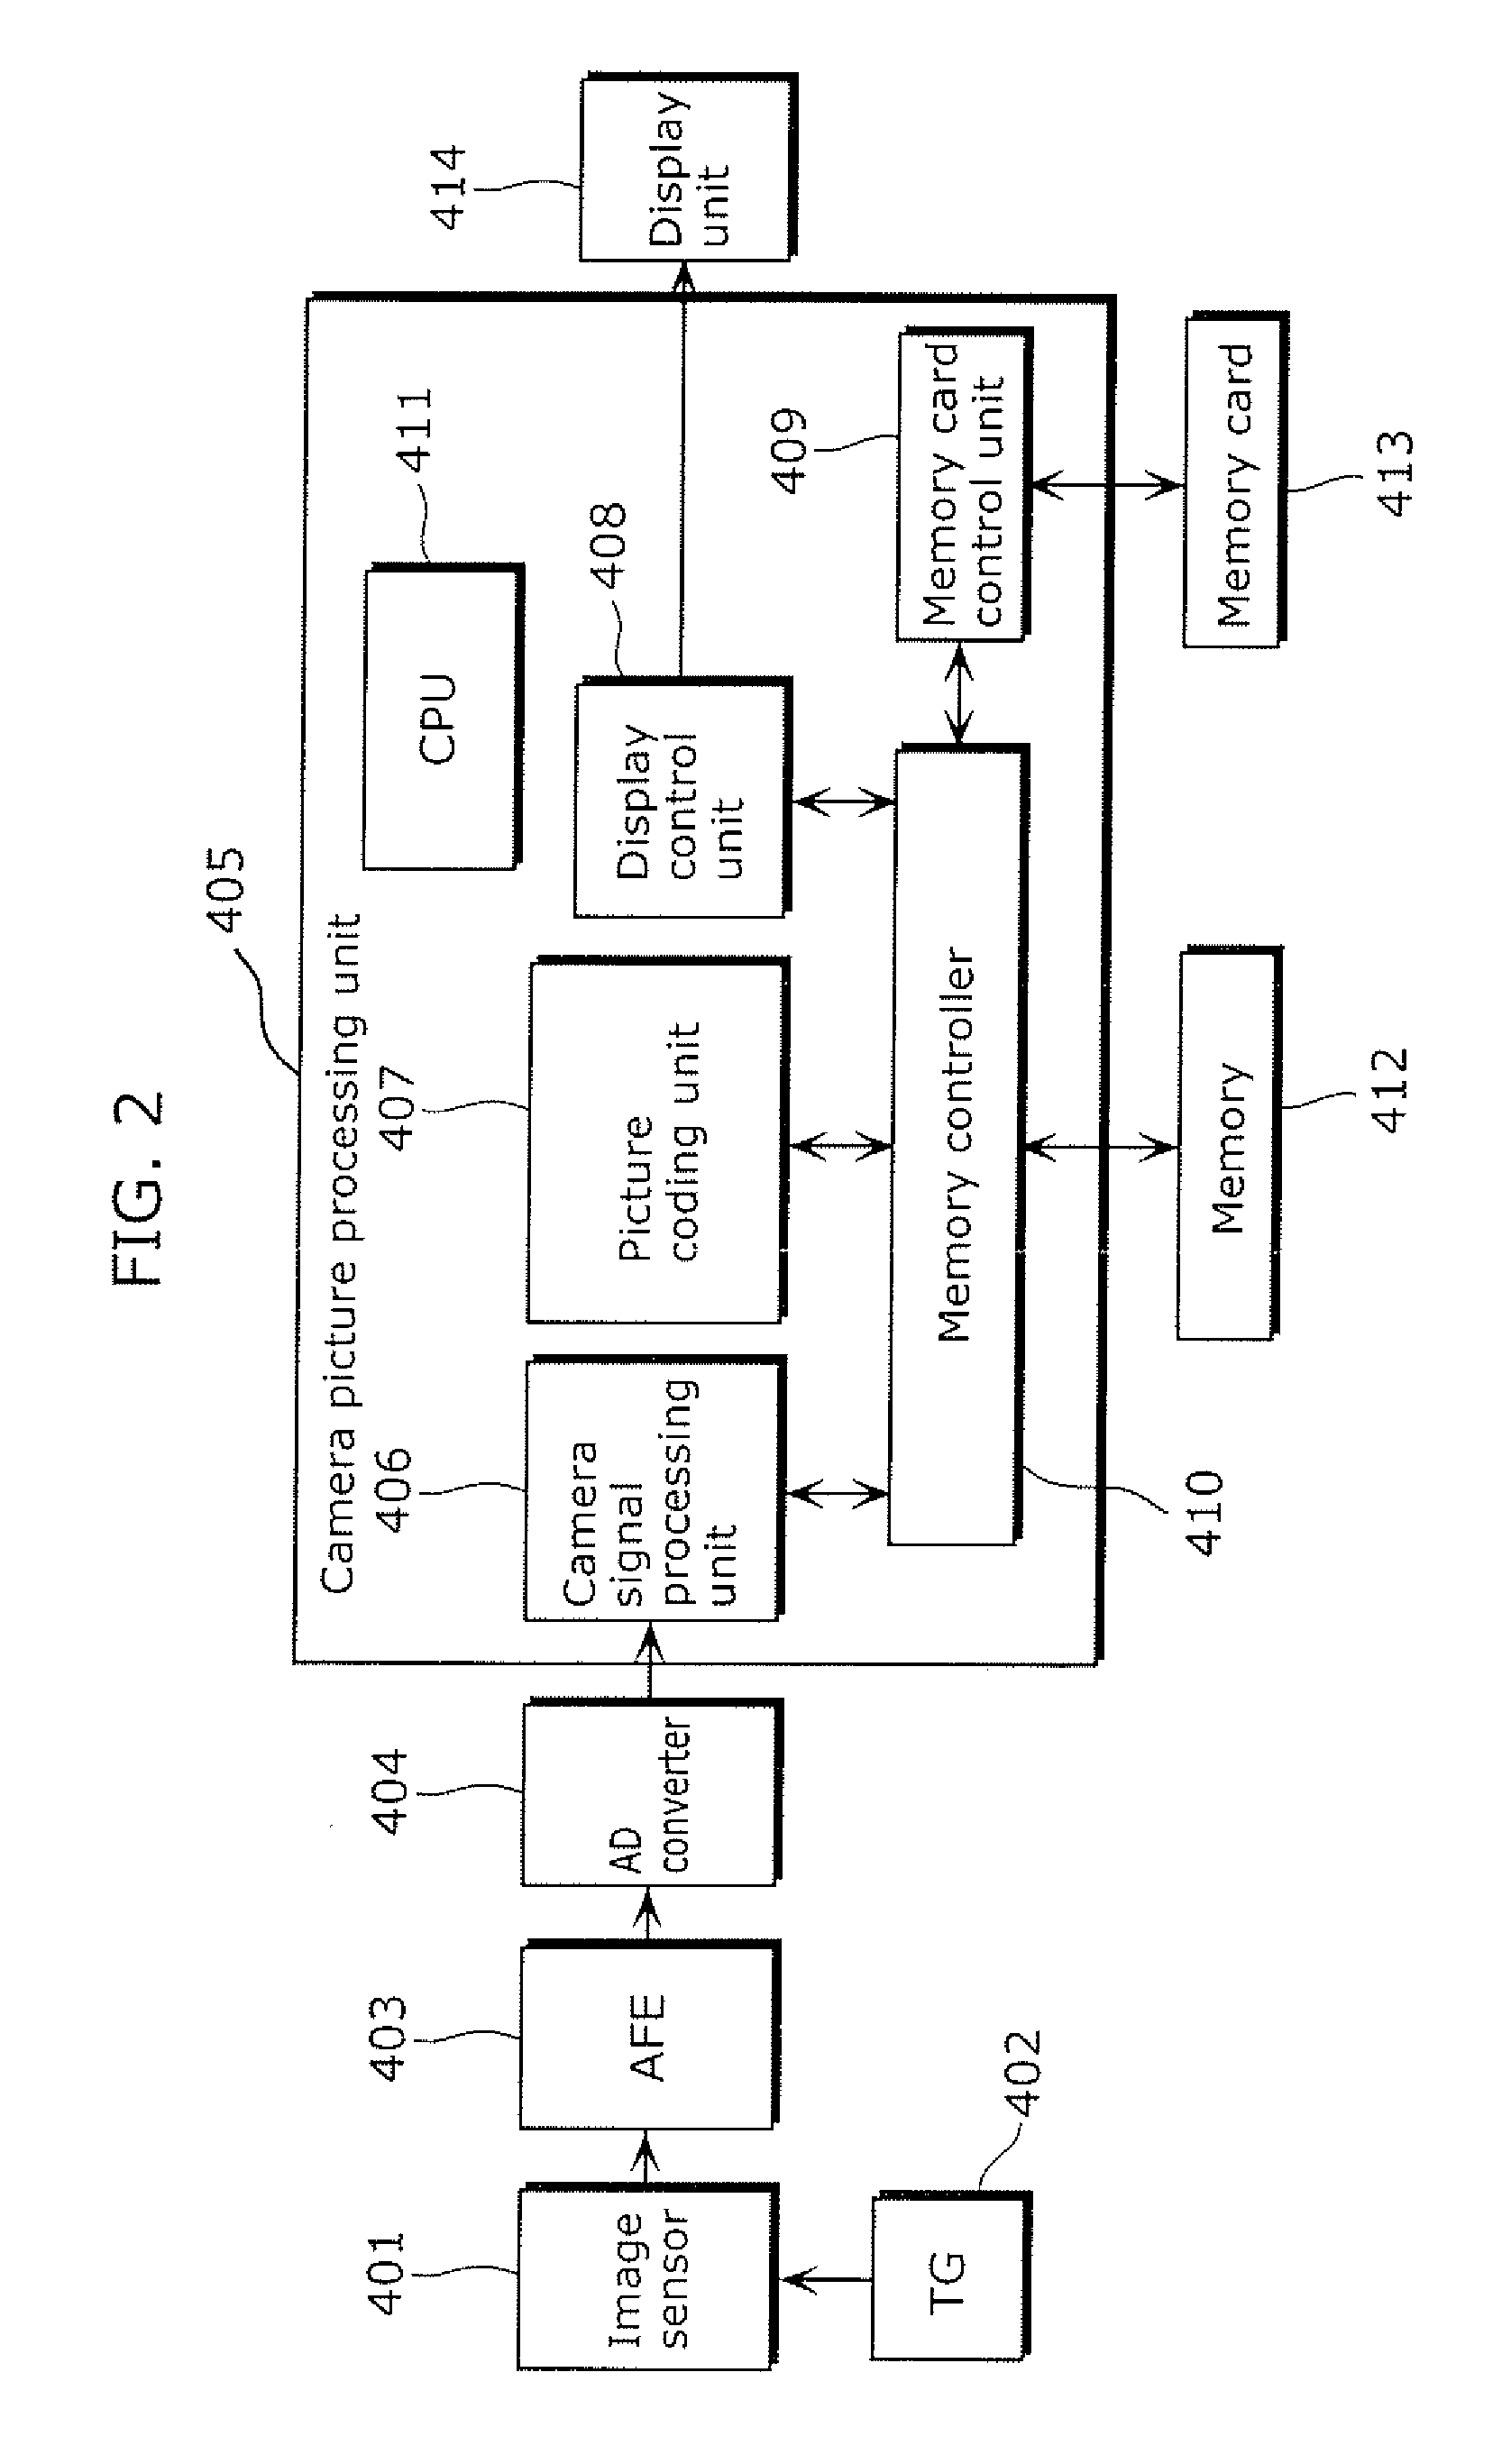 Moving picture coding apparatus, method and program